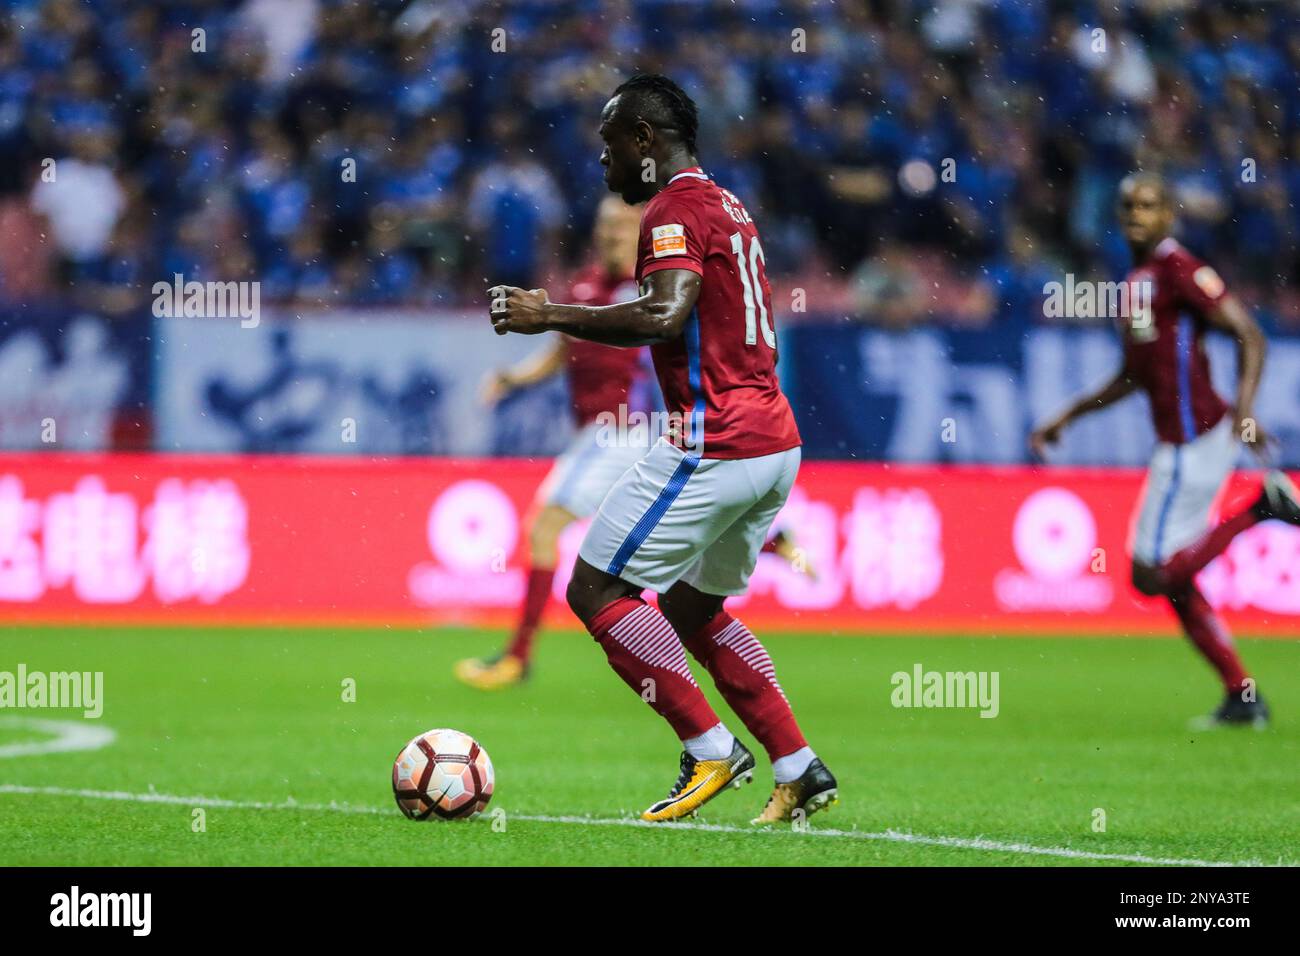 Cameroonian football player Christian Bassogog of Henan Jianye dribbles the ball against Shanghai Greenland Shenhua in their 24th round match during the 2017 Chinese Football Association Super League (CSL) in Shanghai, China, 10 September 2017.(Imaginechina via AP Images) Stockfoto